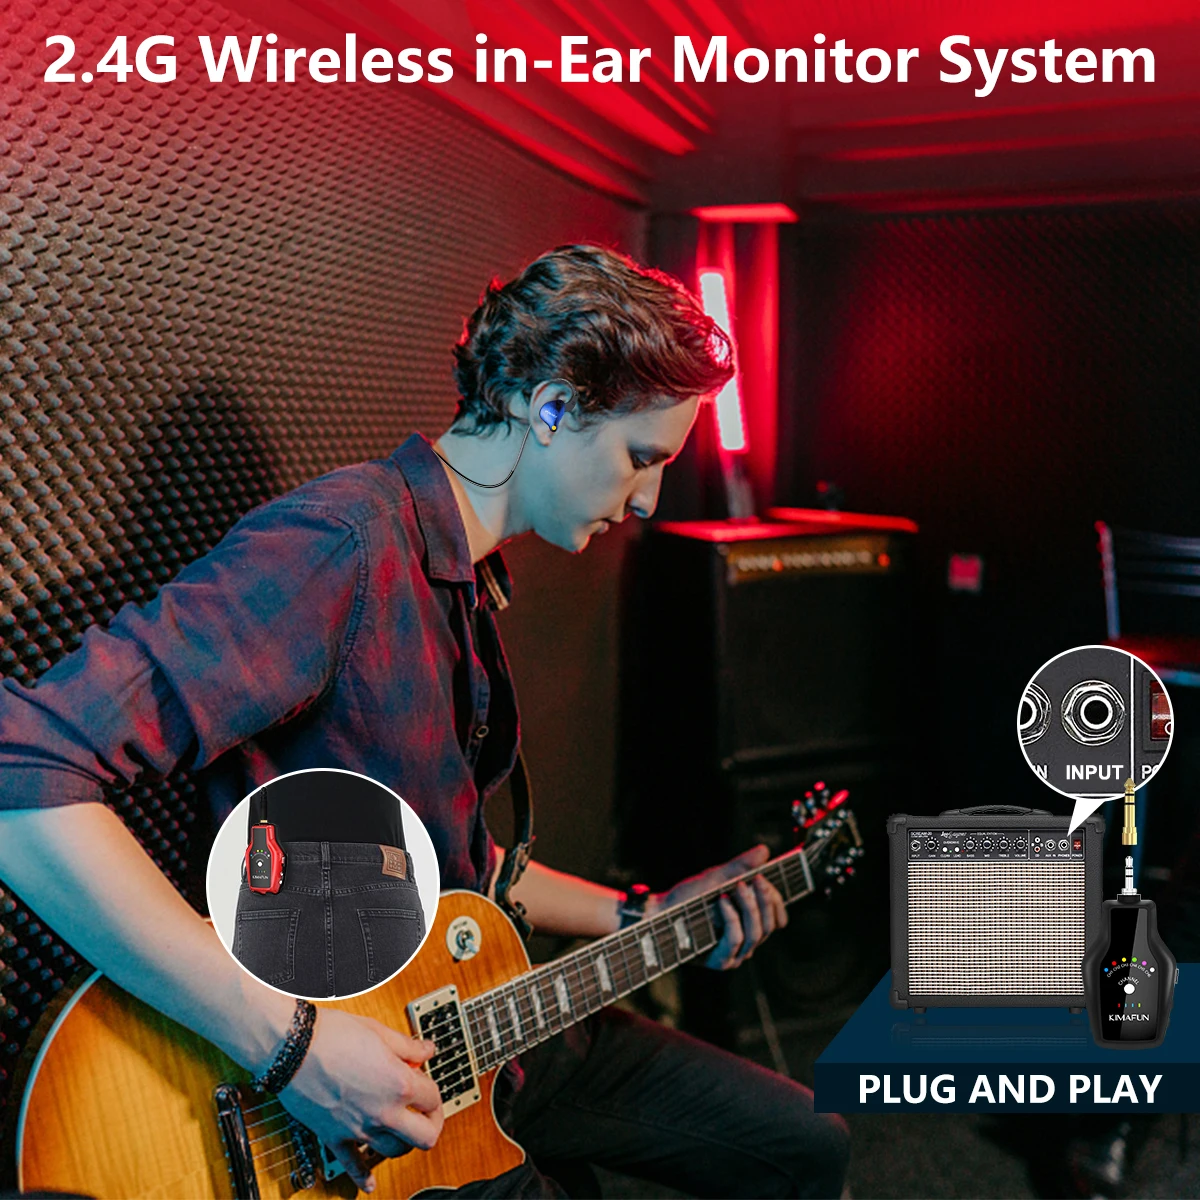 In-Ear Monitoring 2.4G Wireless System Personal IEM for Studio,Rock Band Live Performance,Band Rehearsal,Guitar Amp,Bass Apm,DJ enlarge